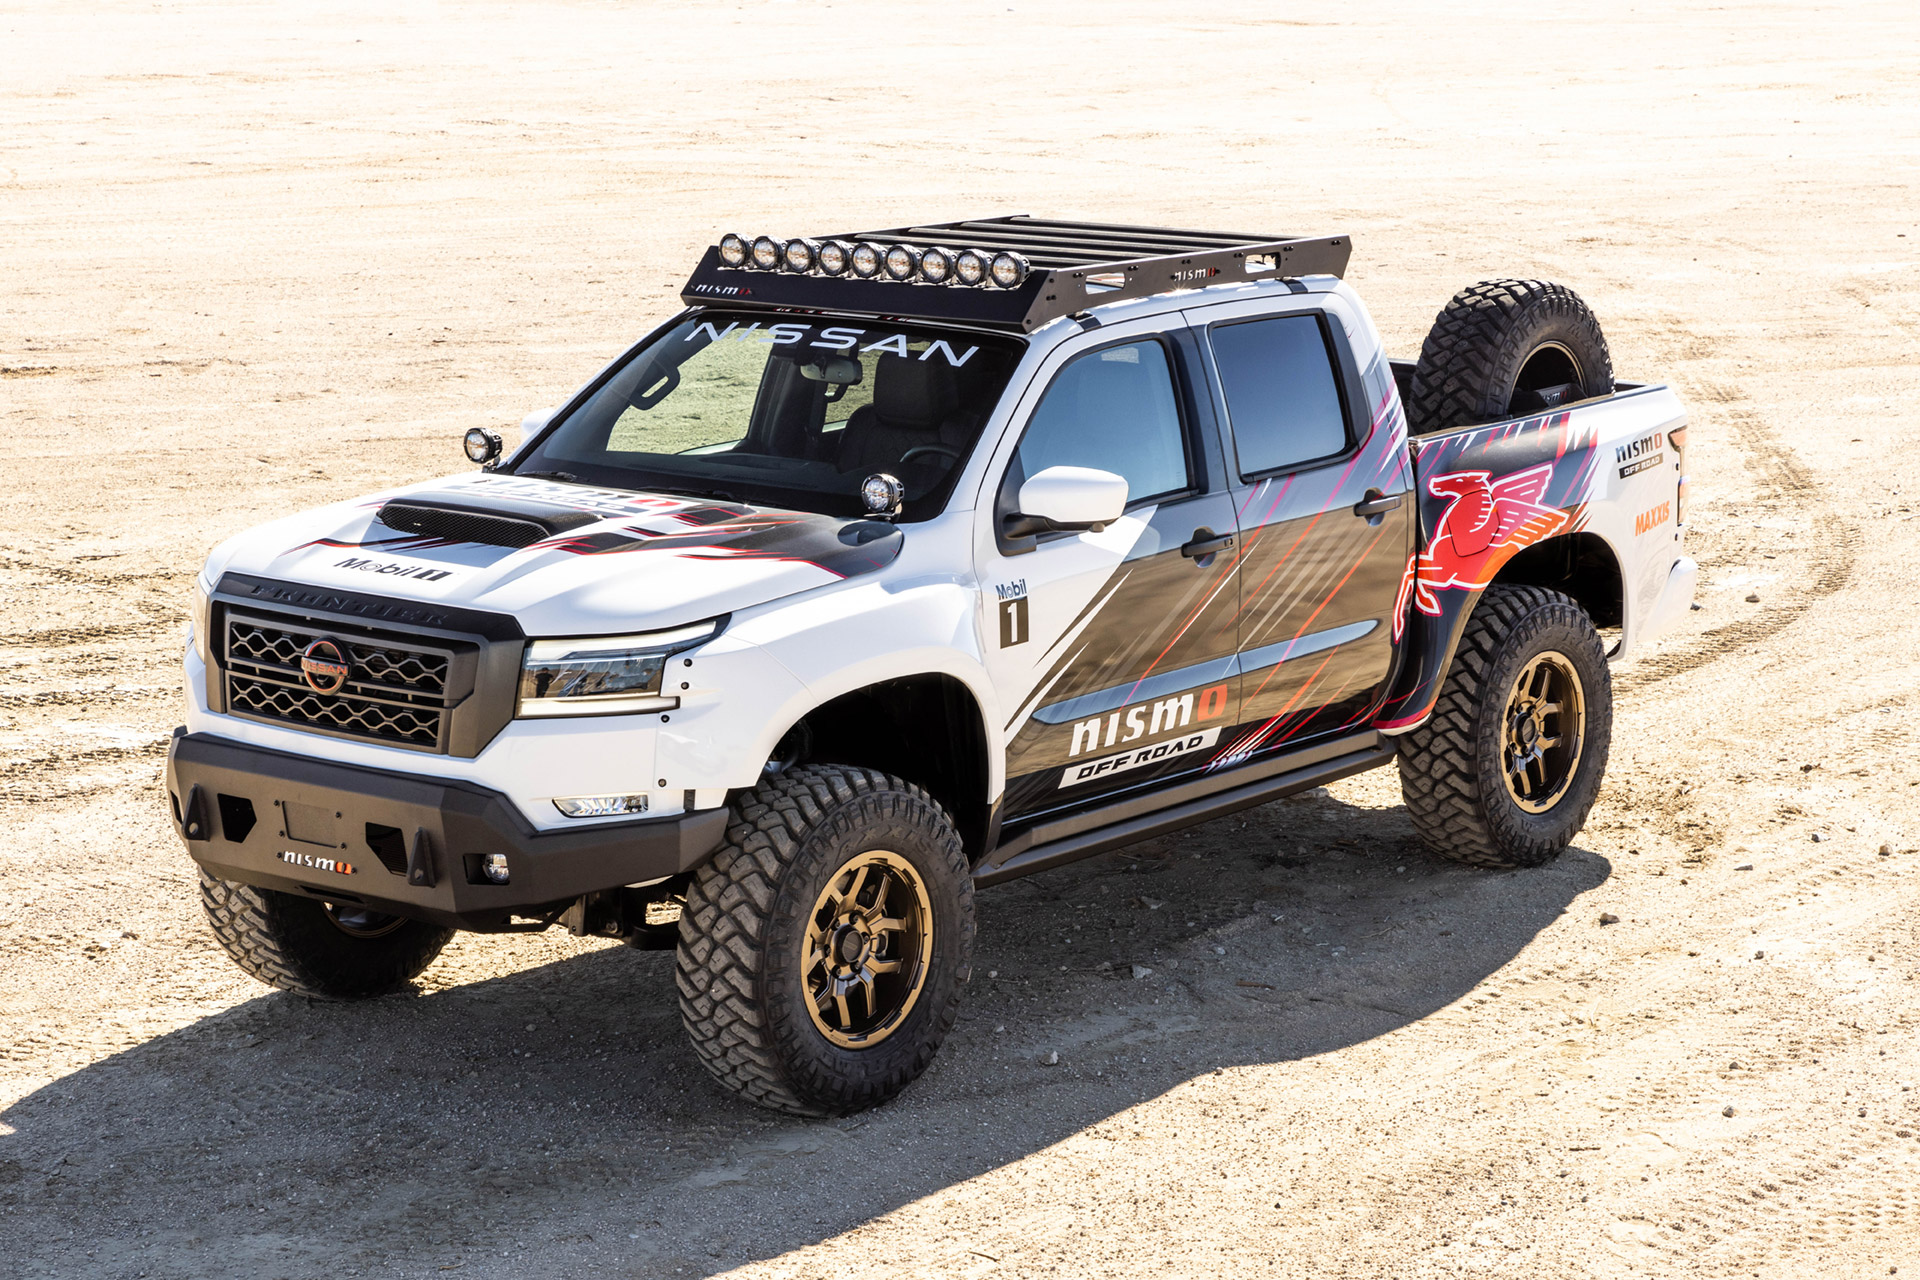 Nissan NISMO OffRoad Frontier V8 Concept Uncrate